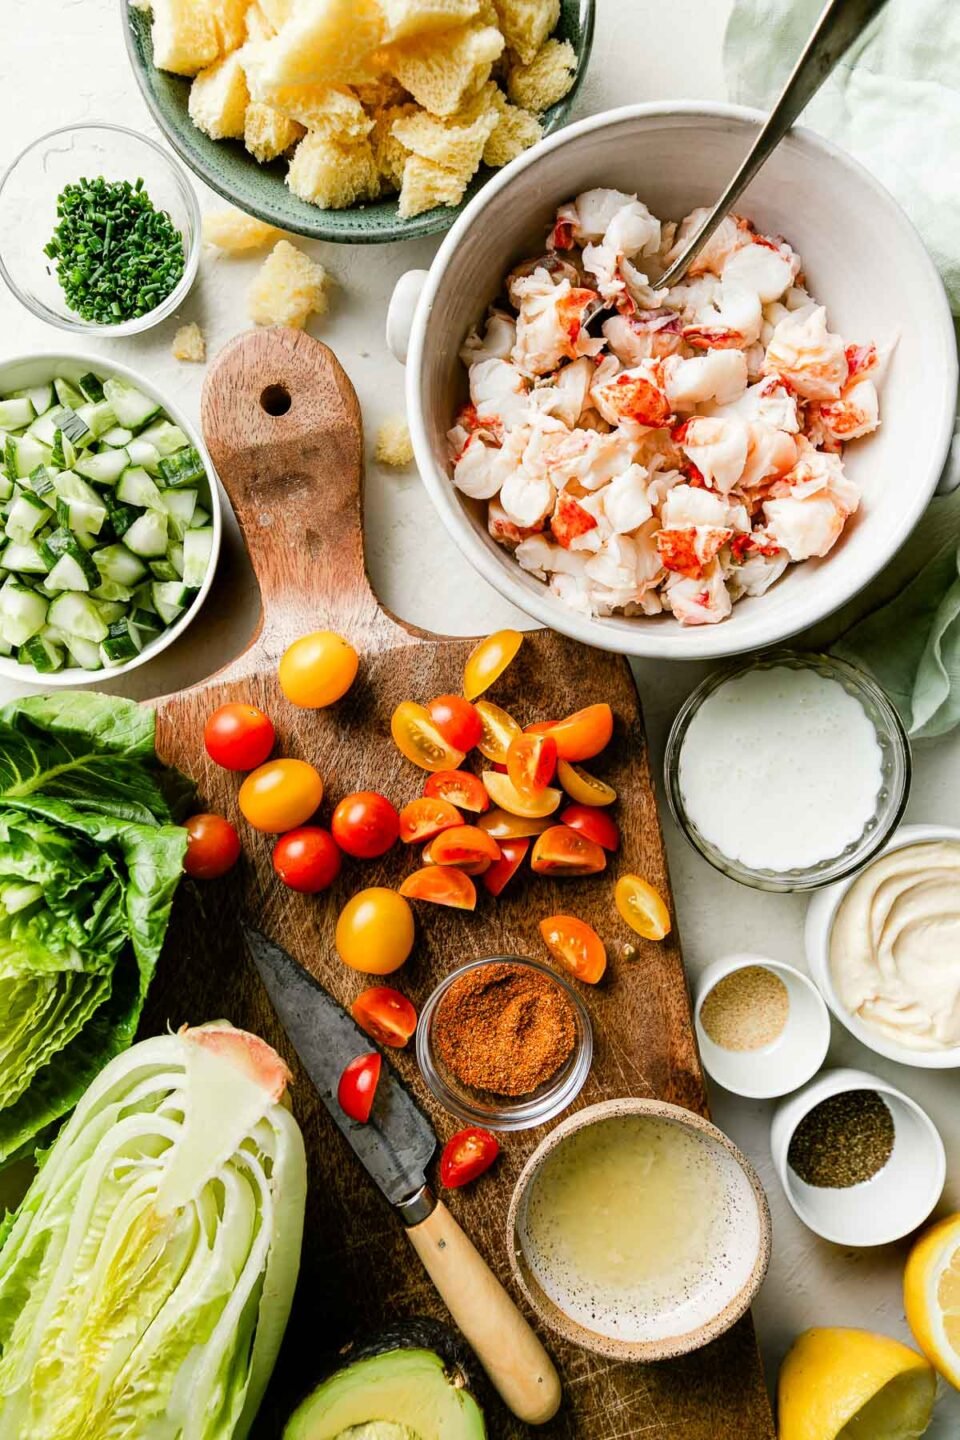 Lobster salad ingredients are arranged on a wooden cutting board and white surface: lettuce, sliced cherry tomatoes, chopped cucumbers, chunks of brioche bread, chopped lobster, and dressing ingredients.